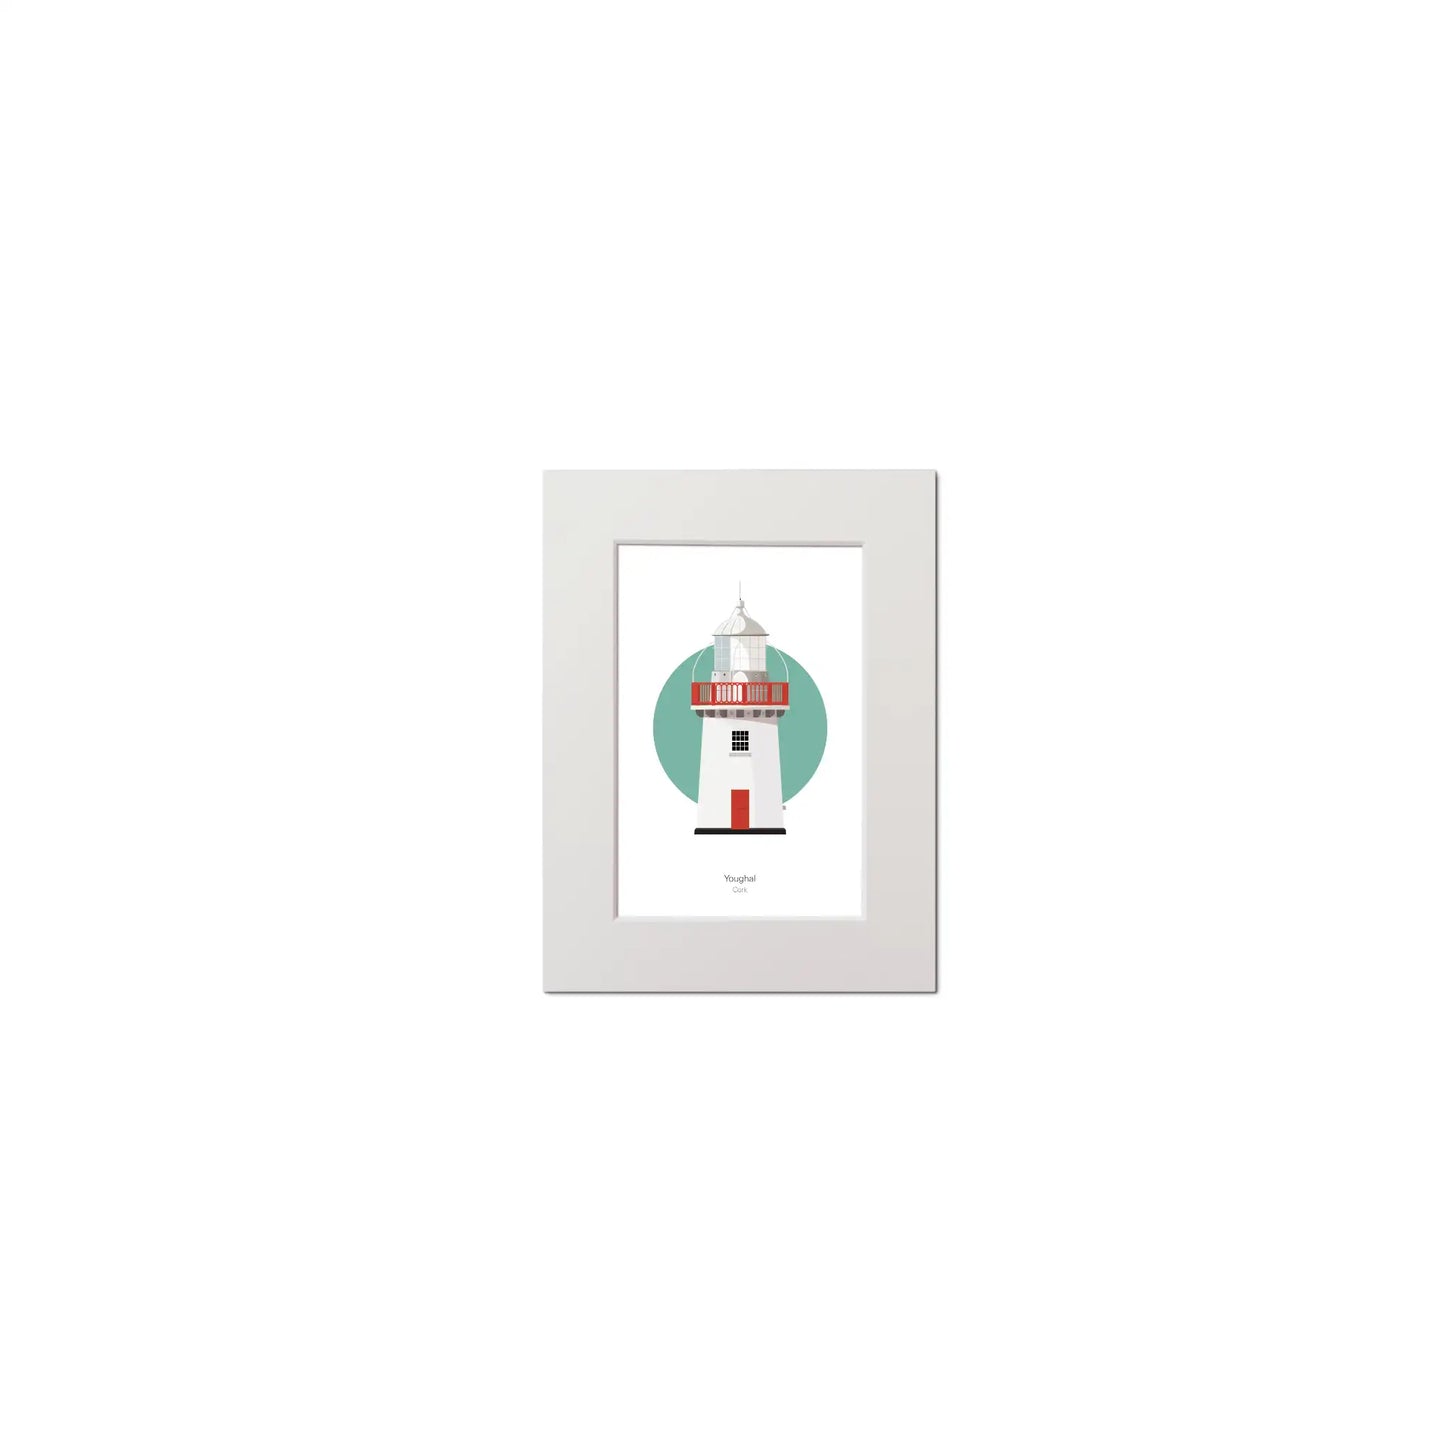 Illustration of Youghal lighthouse on a white background inside light blue square, mounted and measuring 15x20cm.